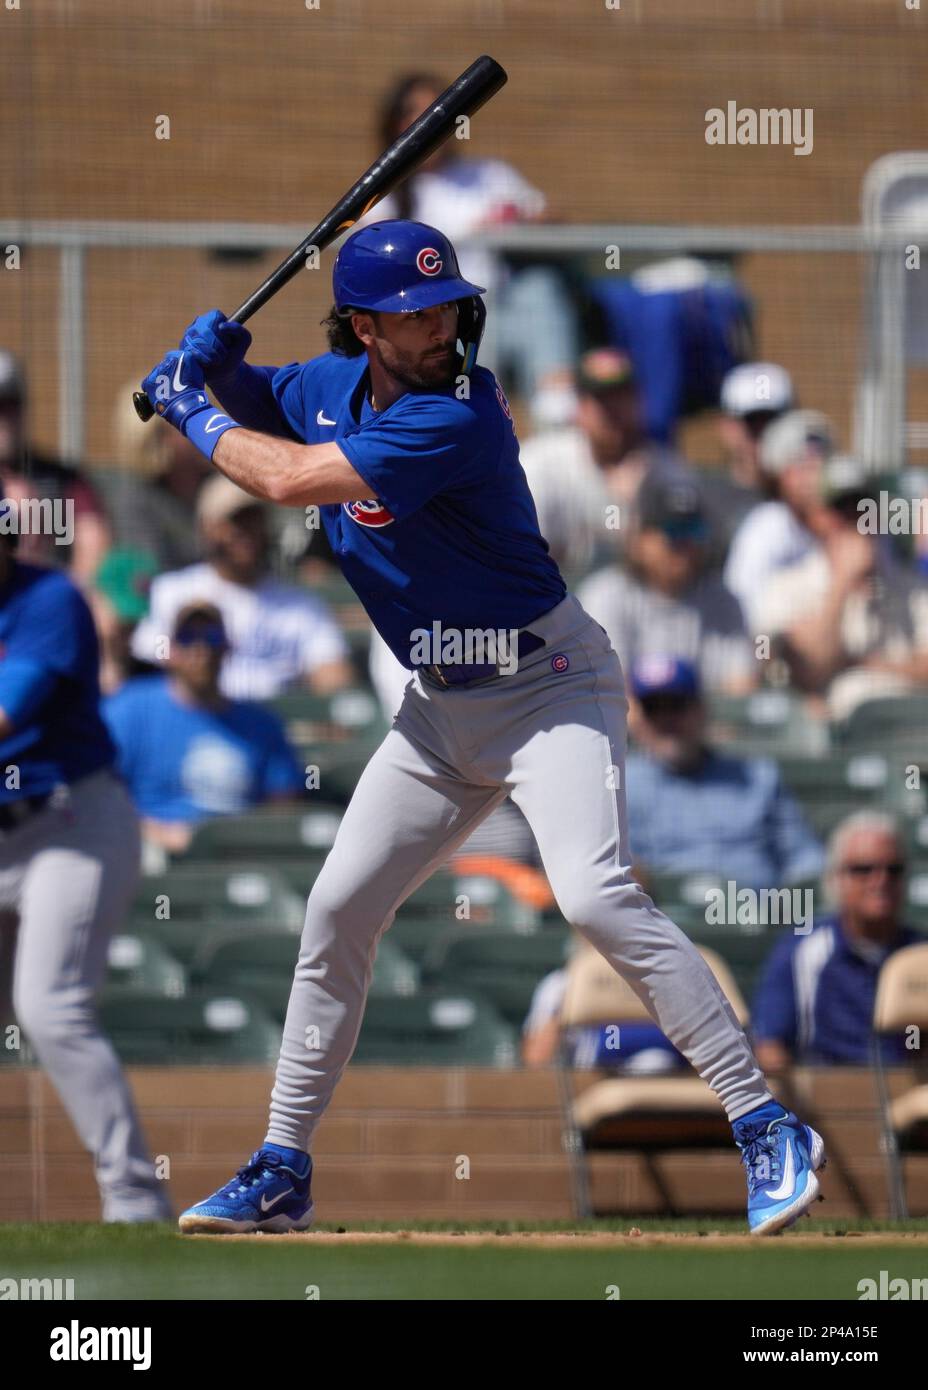 Chicago Cubs' Dansby Swanson (7) bats during a spring training